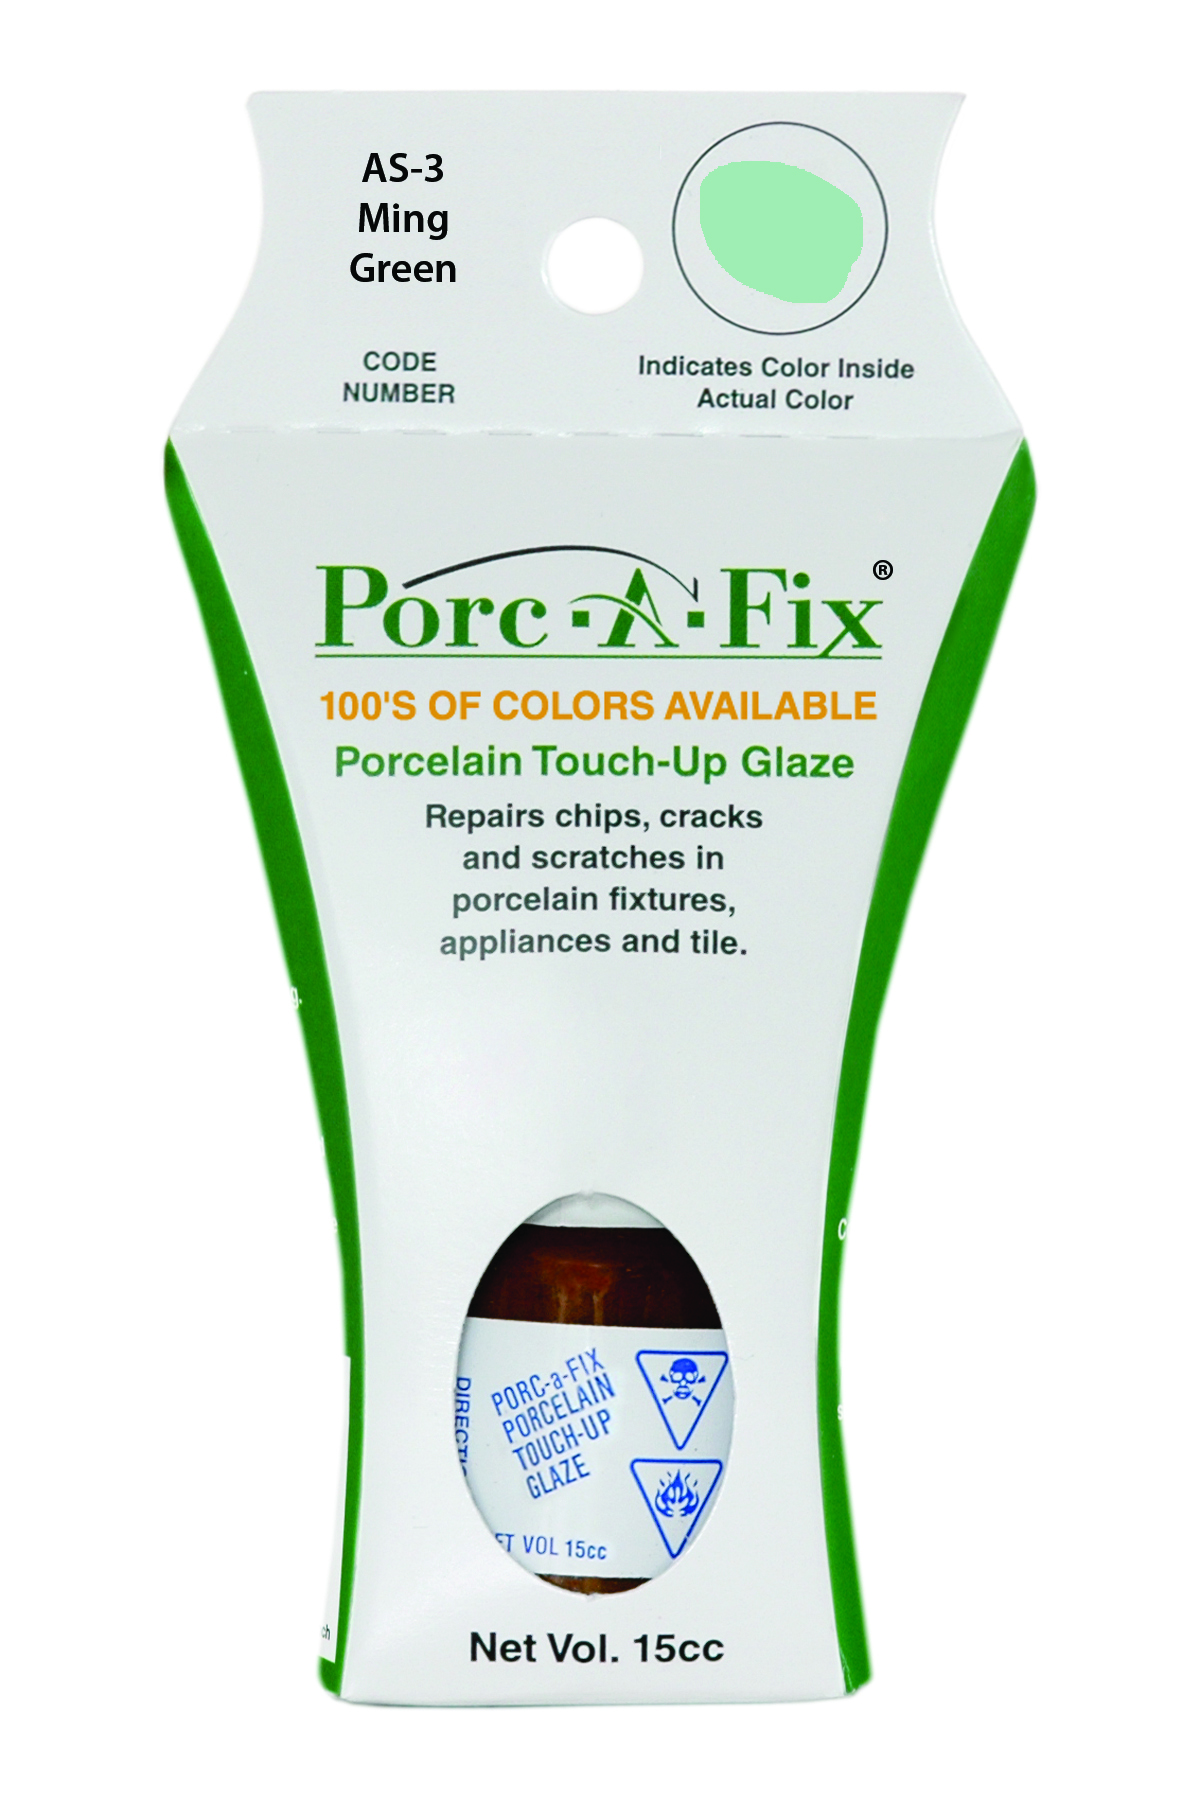 Fixture-Fix | AS-3 | Porc-A-Fix Touch-Up Glaze American Standard Ming Green- Compatible with American Standard 070900-0340A Touch Up Paint Kit - MING GREEN